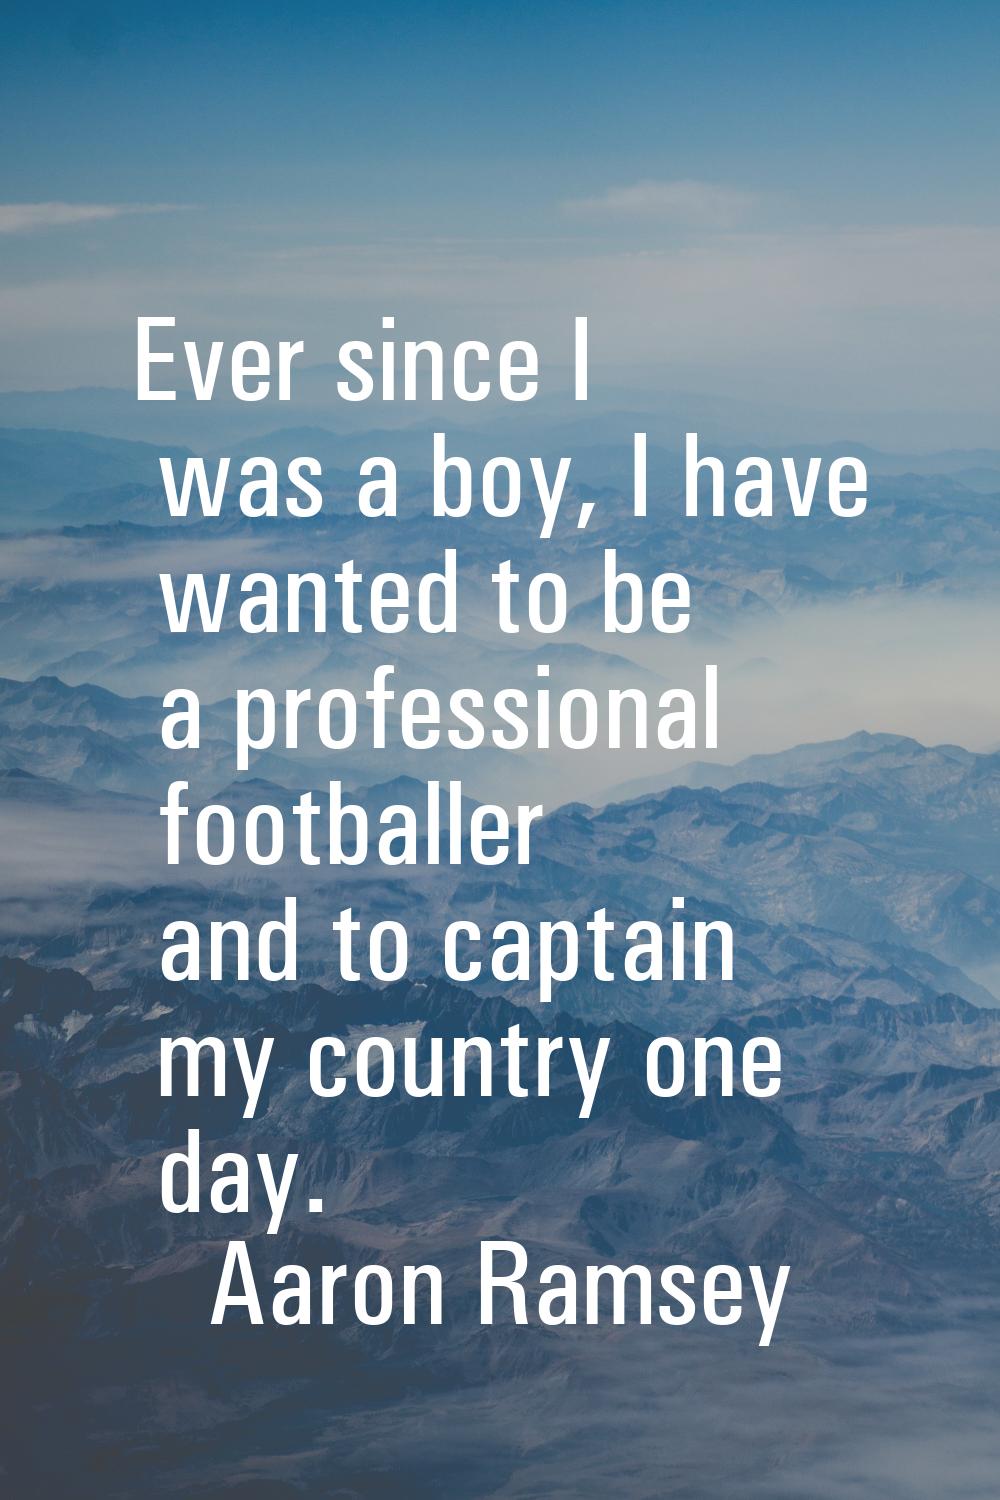 Ever since I was a boy, I have wanted to be a professional footballer and to captain my country one